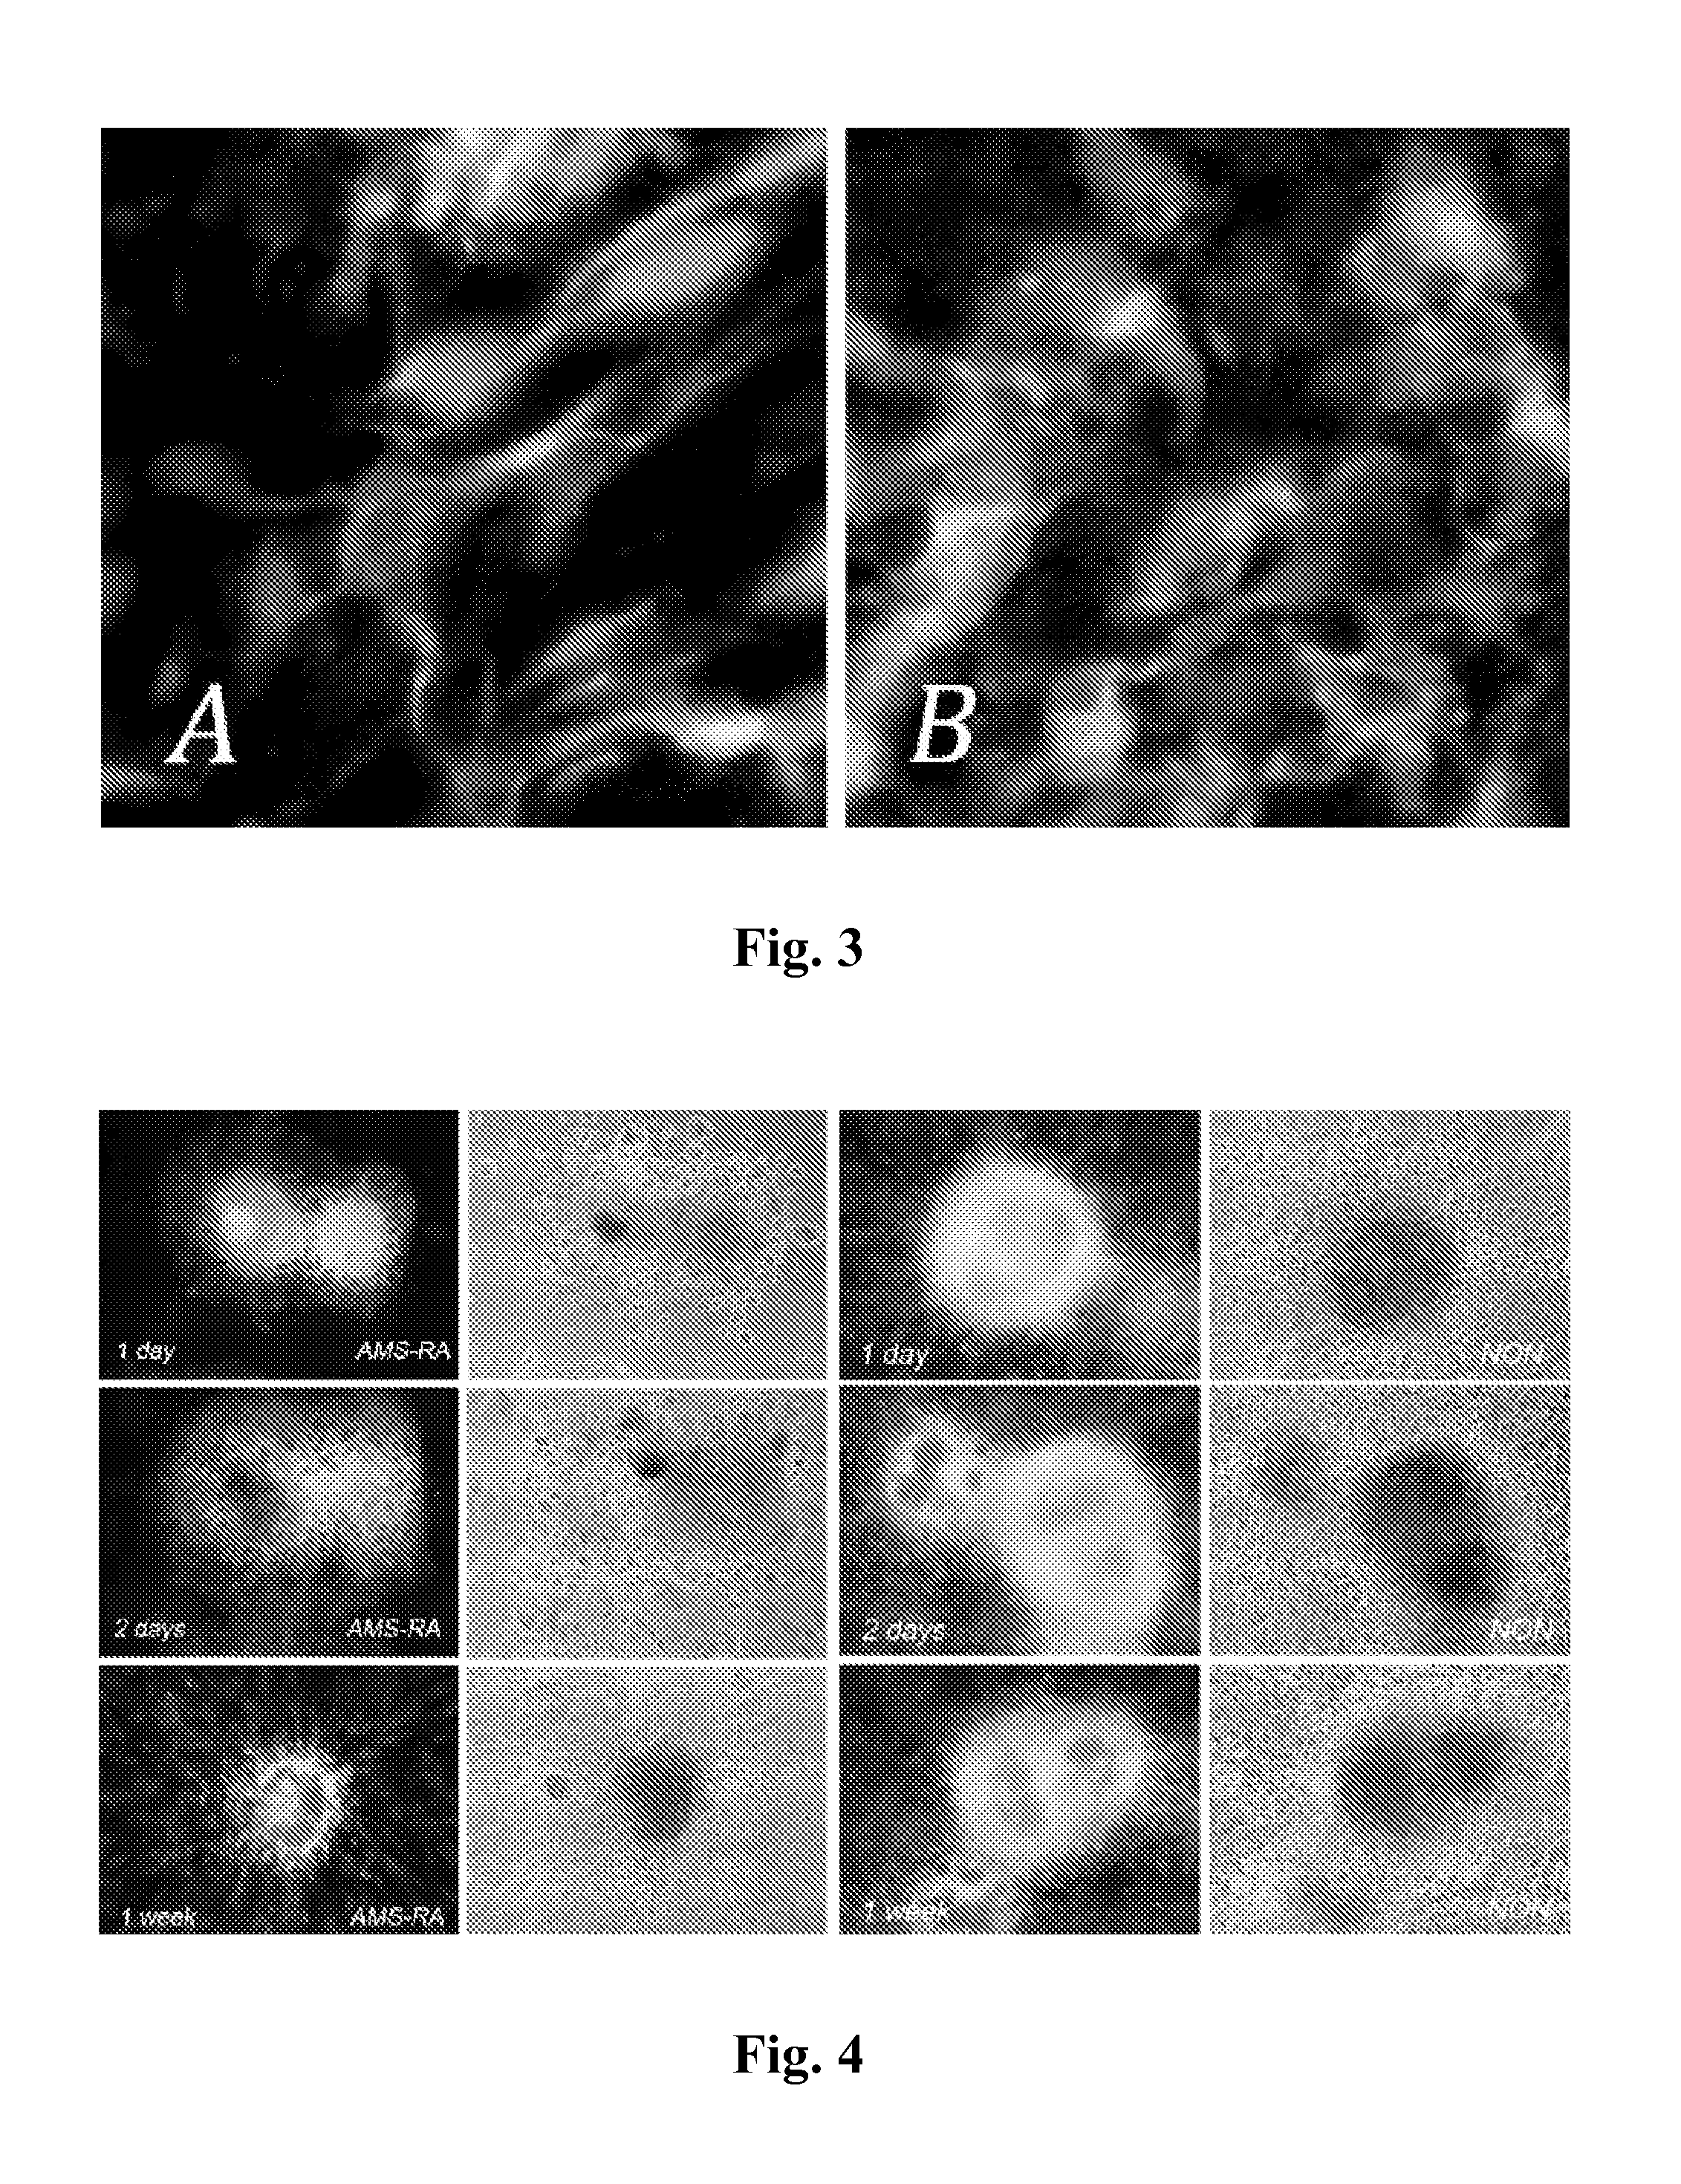 Method for stem cell differentiation in vivo by delivery of morphogenes with mesoporous silica and corresponding pharmceutical active ingredients